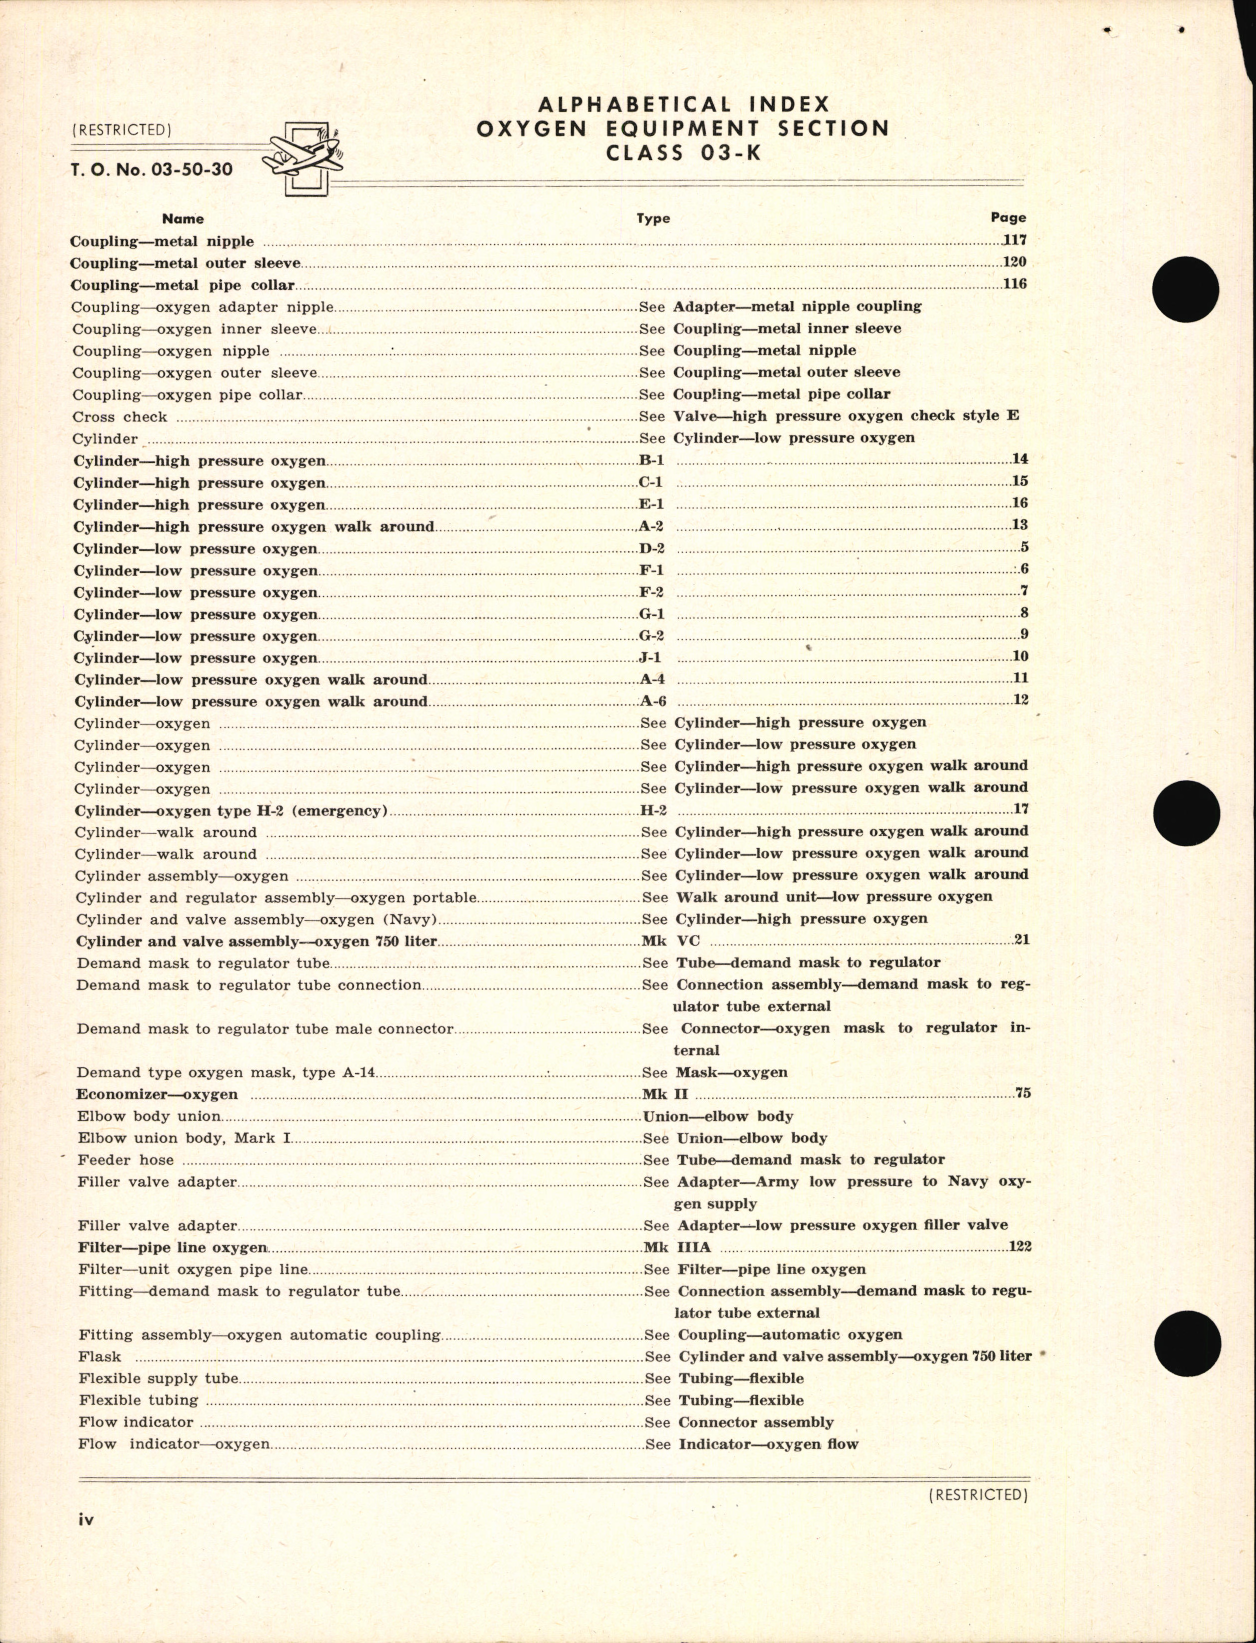 Sample page 6 from AirCorps Library document: Index of Army-Navy Aeronautical Equipment - Oxygen